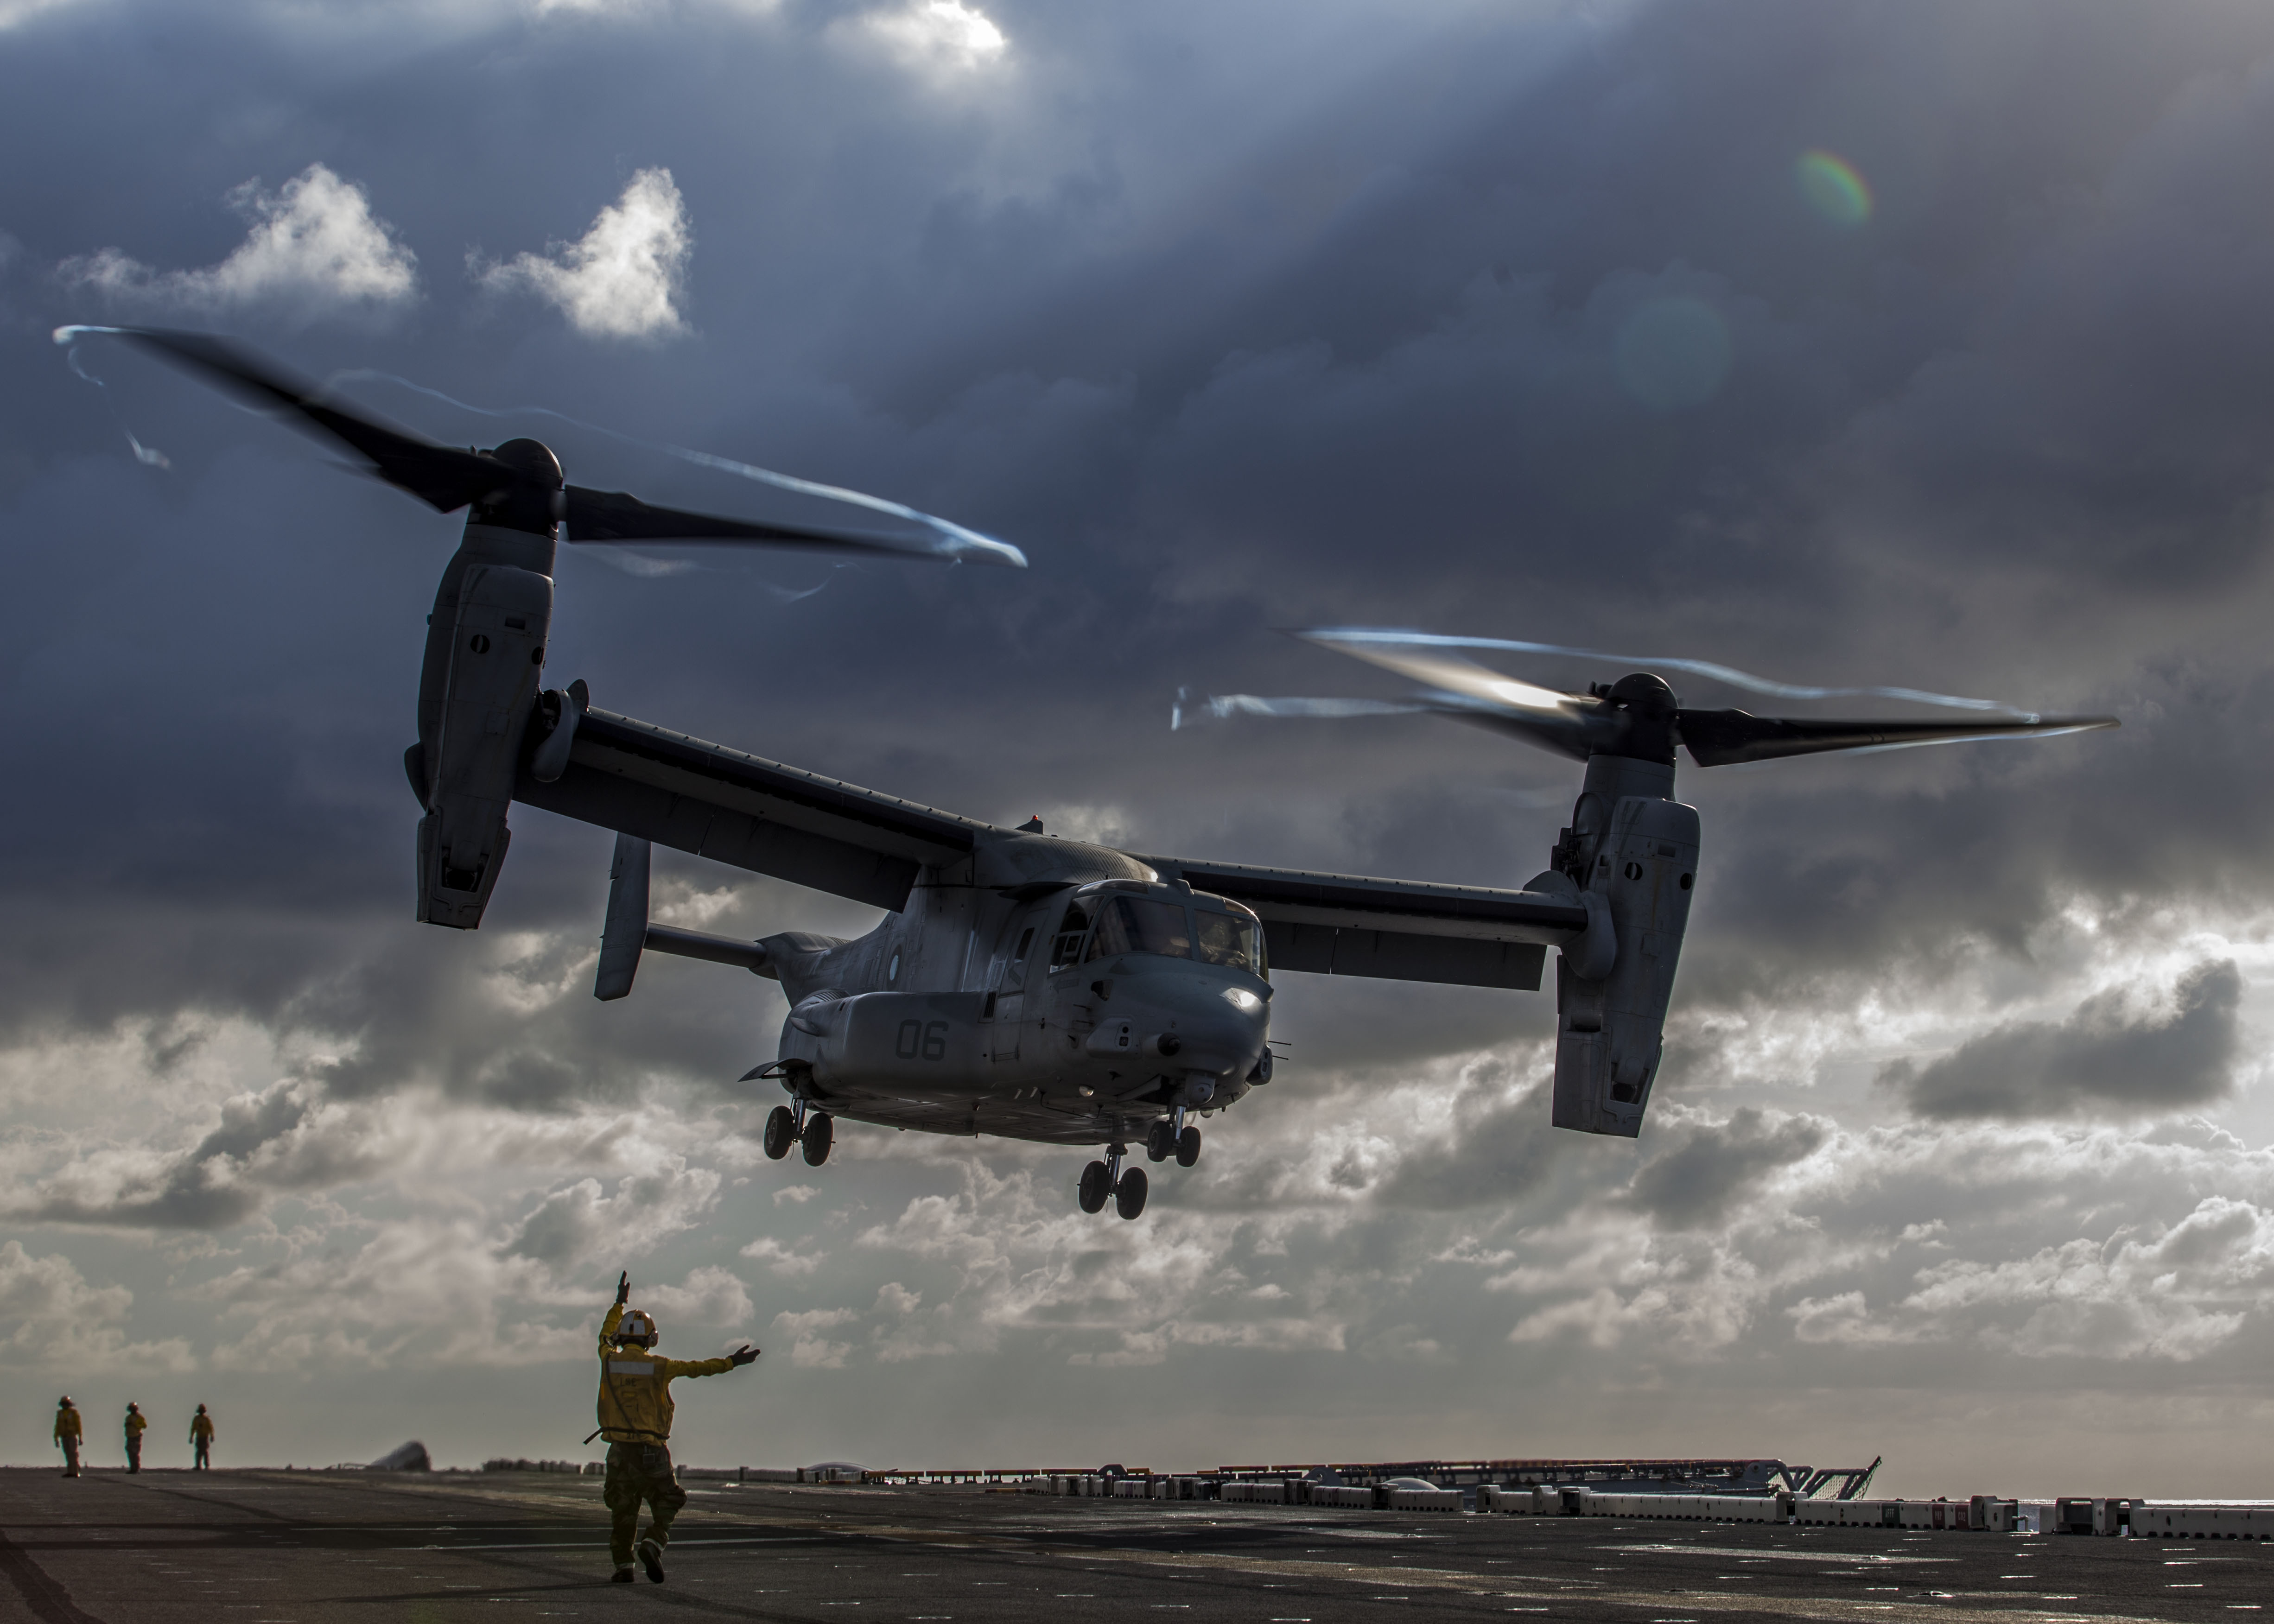 A U.S. Marine Corps MV-22B Osprey takes off from the flight deck of the USS Kearsarge (LHD 3) during flight operations on March 20, 2013 130320-M-SO289-002